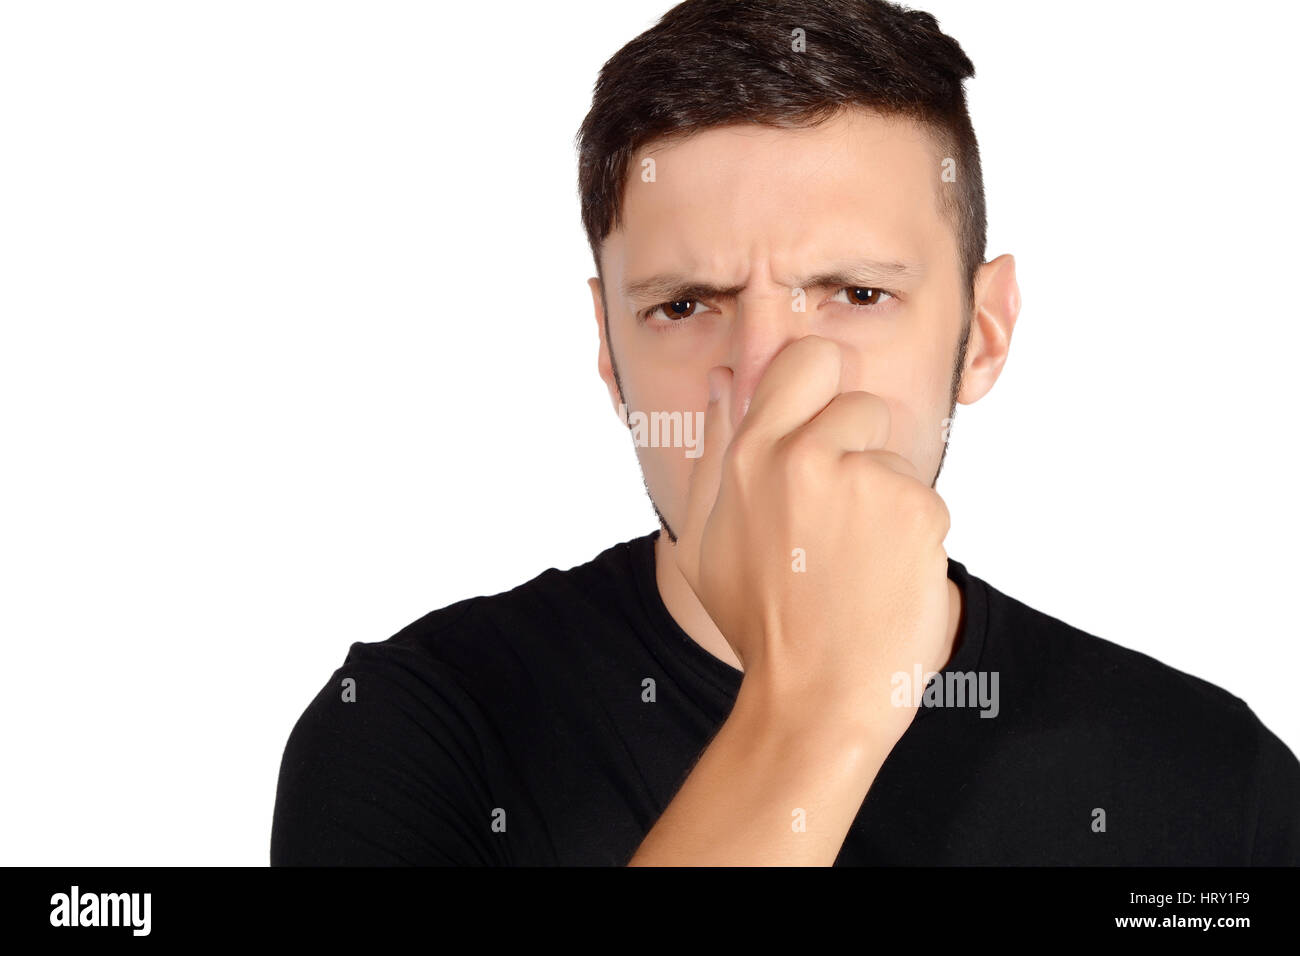 Portrait of young man holding his nose against a bad smell. Isolated white background. Stock Photo